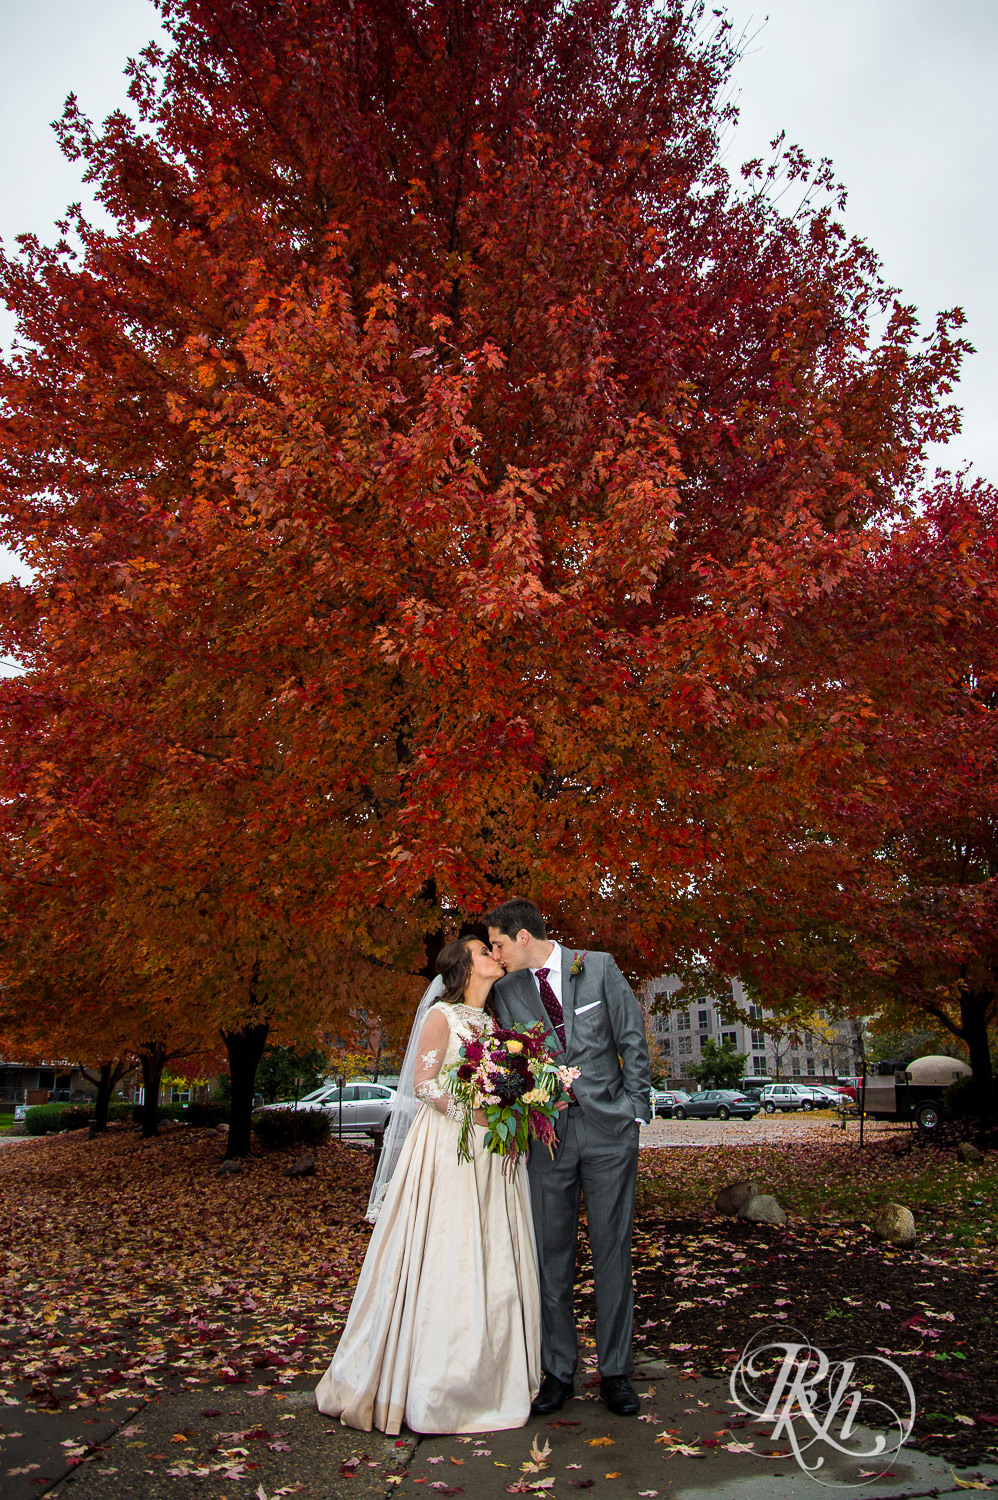 Bride and groom kiss in front of tree with red and orange leaves on a rainy wedding day in Minneapolis, Minnesota.